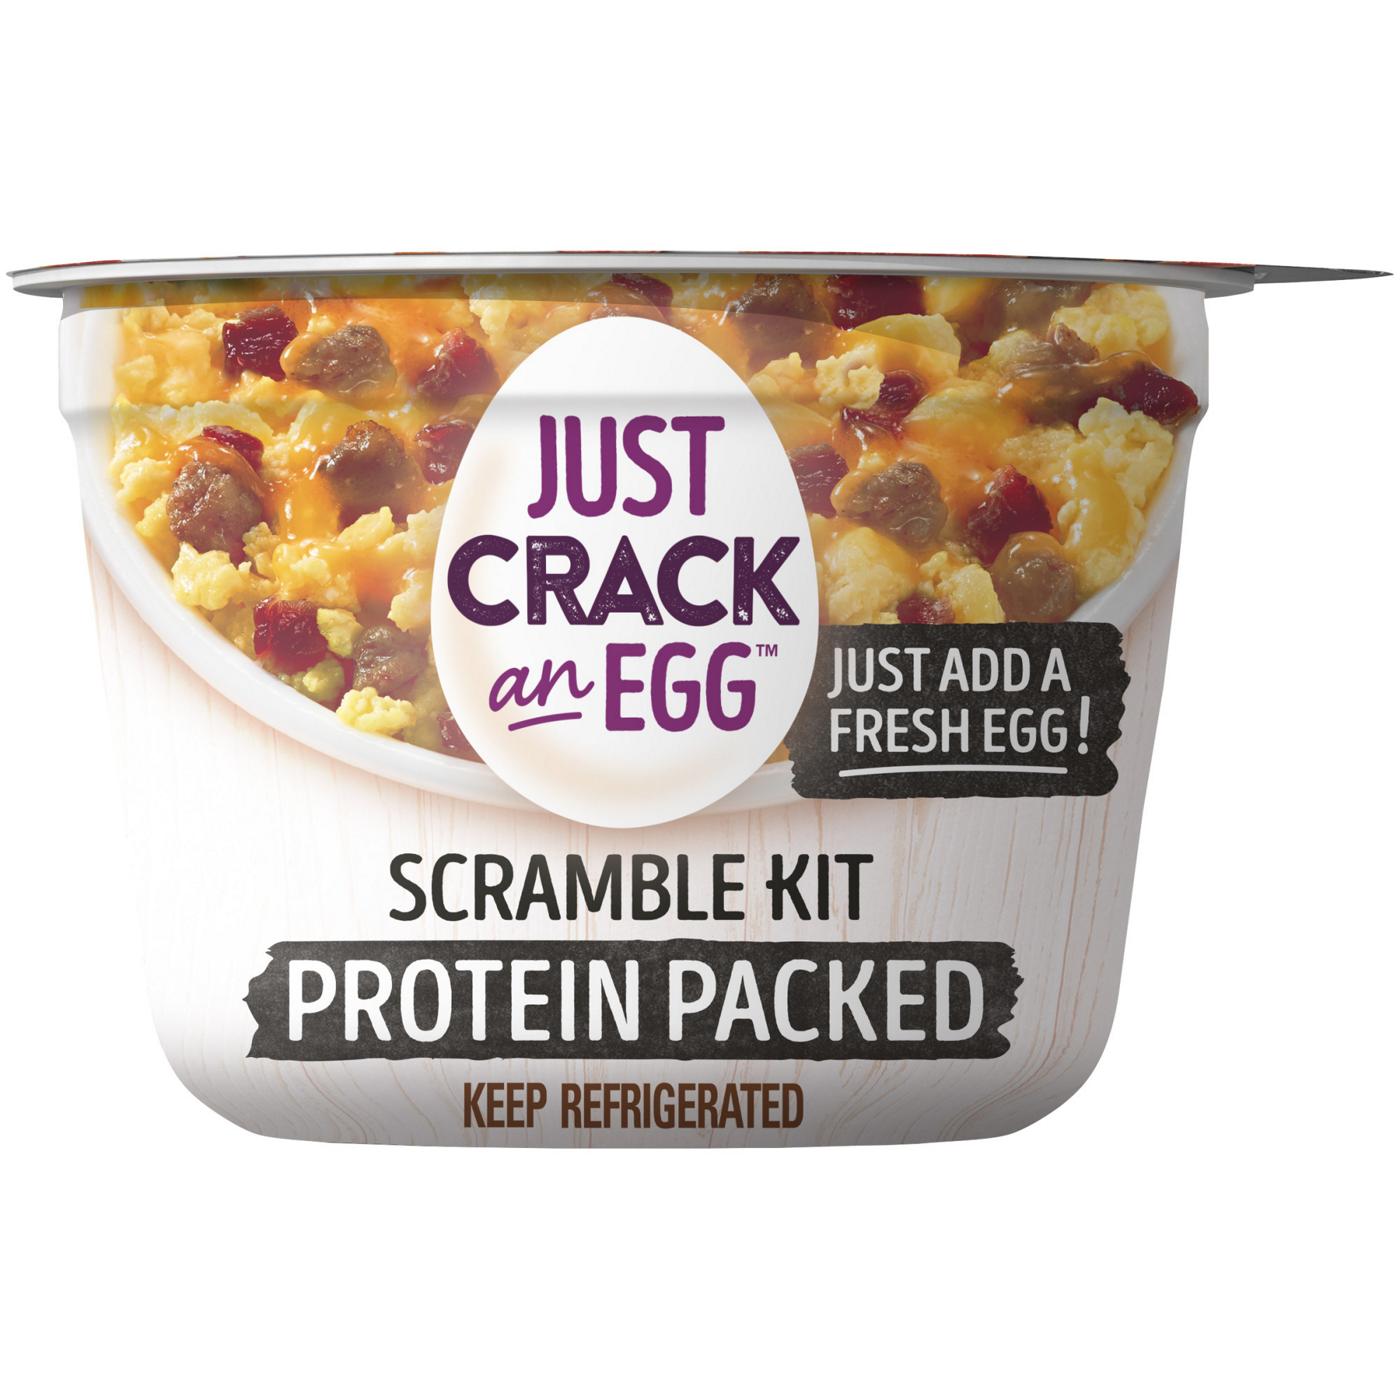 Just Crack an Egg Breakfast Scramble Kit - Protein Packed; image 1 of 9